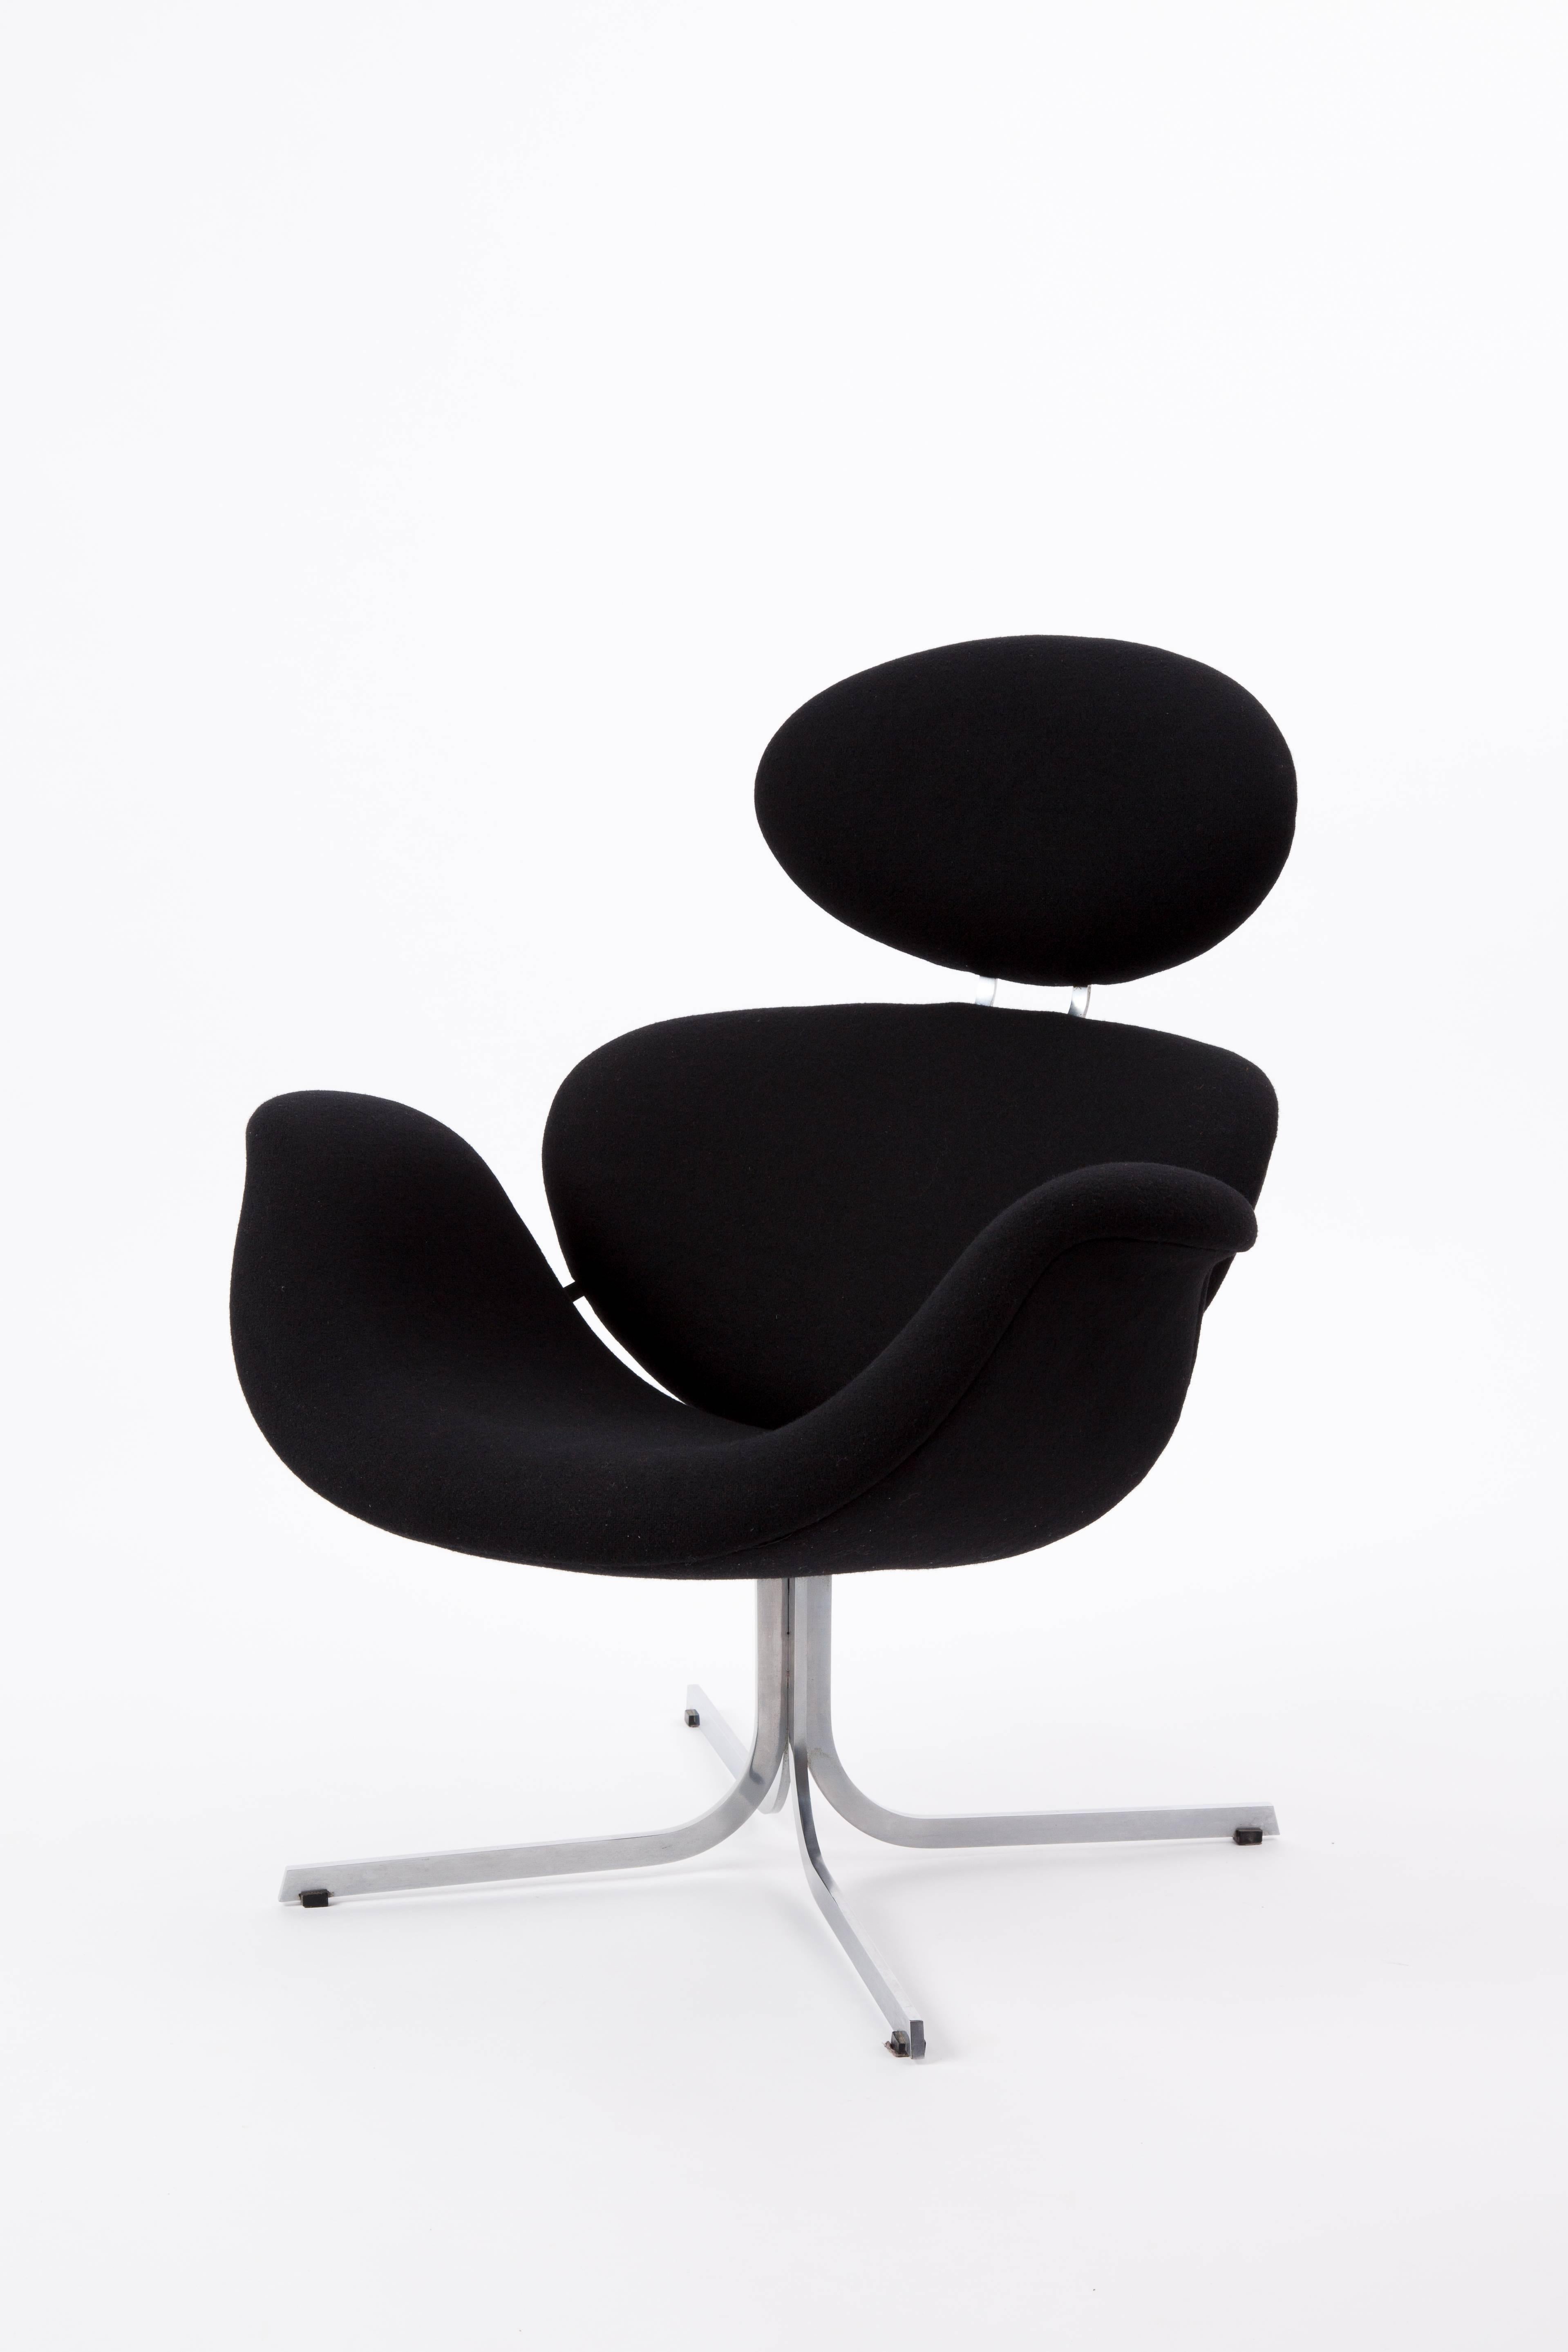 BIG TULIP PIERRE PAULIN for  Artifort. Big tulip of Pierre Paulin on early base and with the round top. Pierre Paulin designed this chair in 1965 for Dutch company Artifort. The lounge chair has been reupholstered with black wool Tonus of Kvadrat.